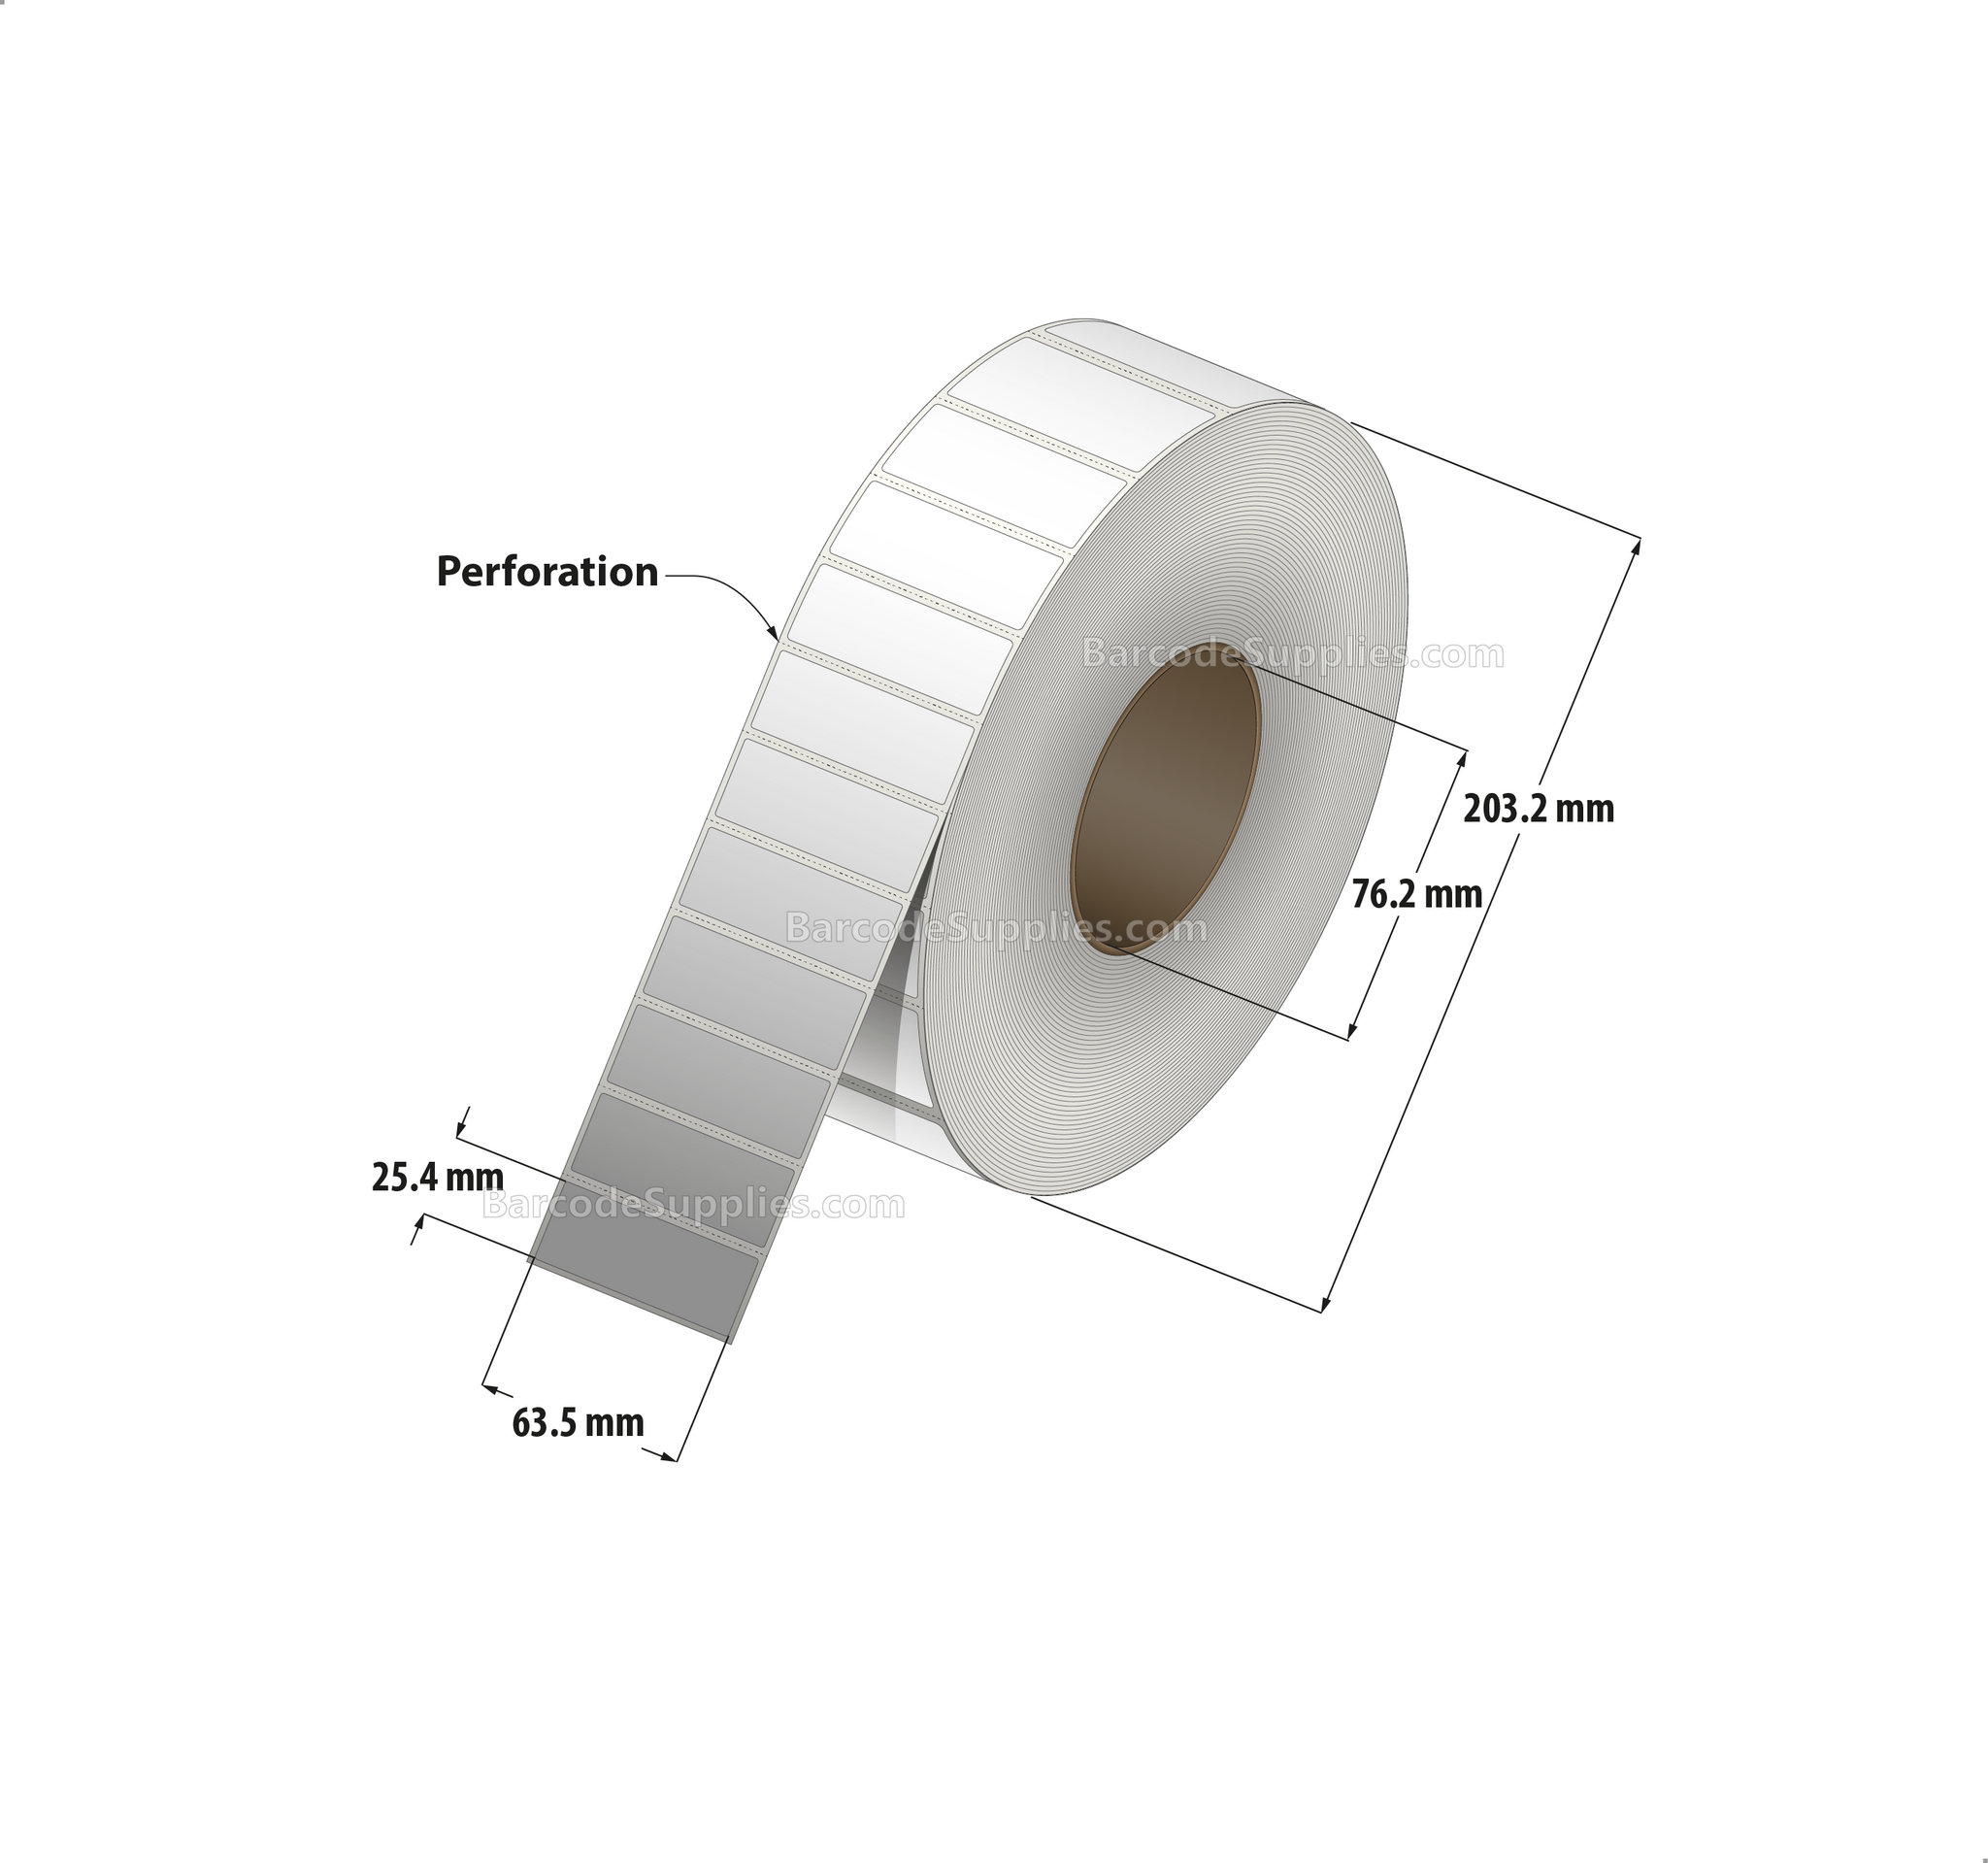 2.5 x 1 Thermal Transfer White Labels With Permanent Adhesive - Perforated - 5500 Labels Per Roll - Carton Of 8 Rolls - 44000 Labels Total - MPN: RT-25-1-5500-3